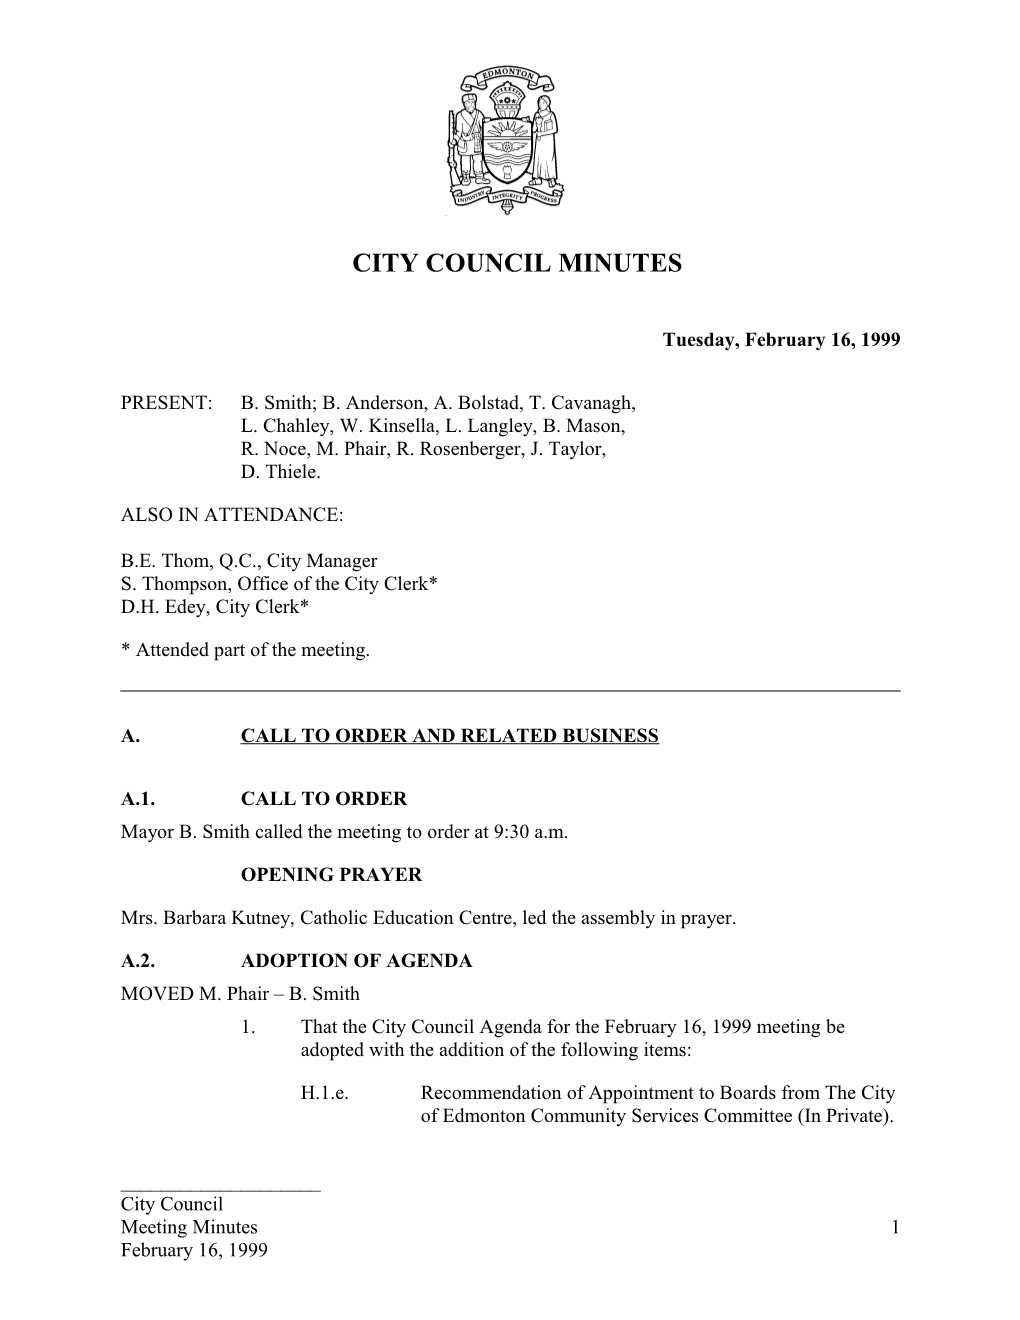 Minutes for City Council February 16, 1999 Meeting